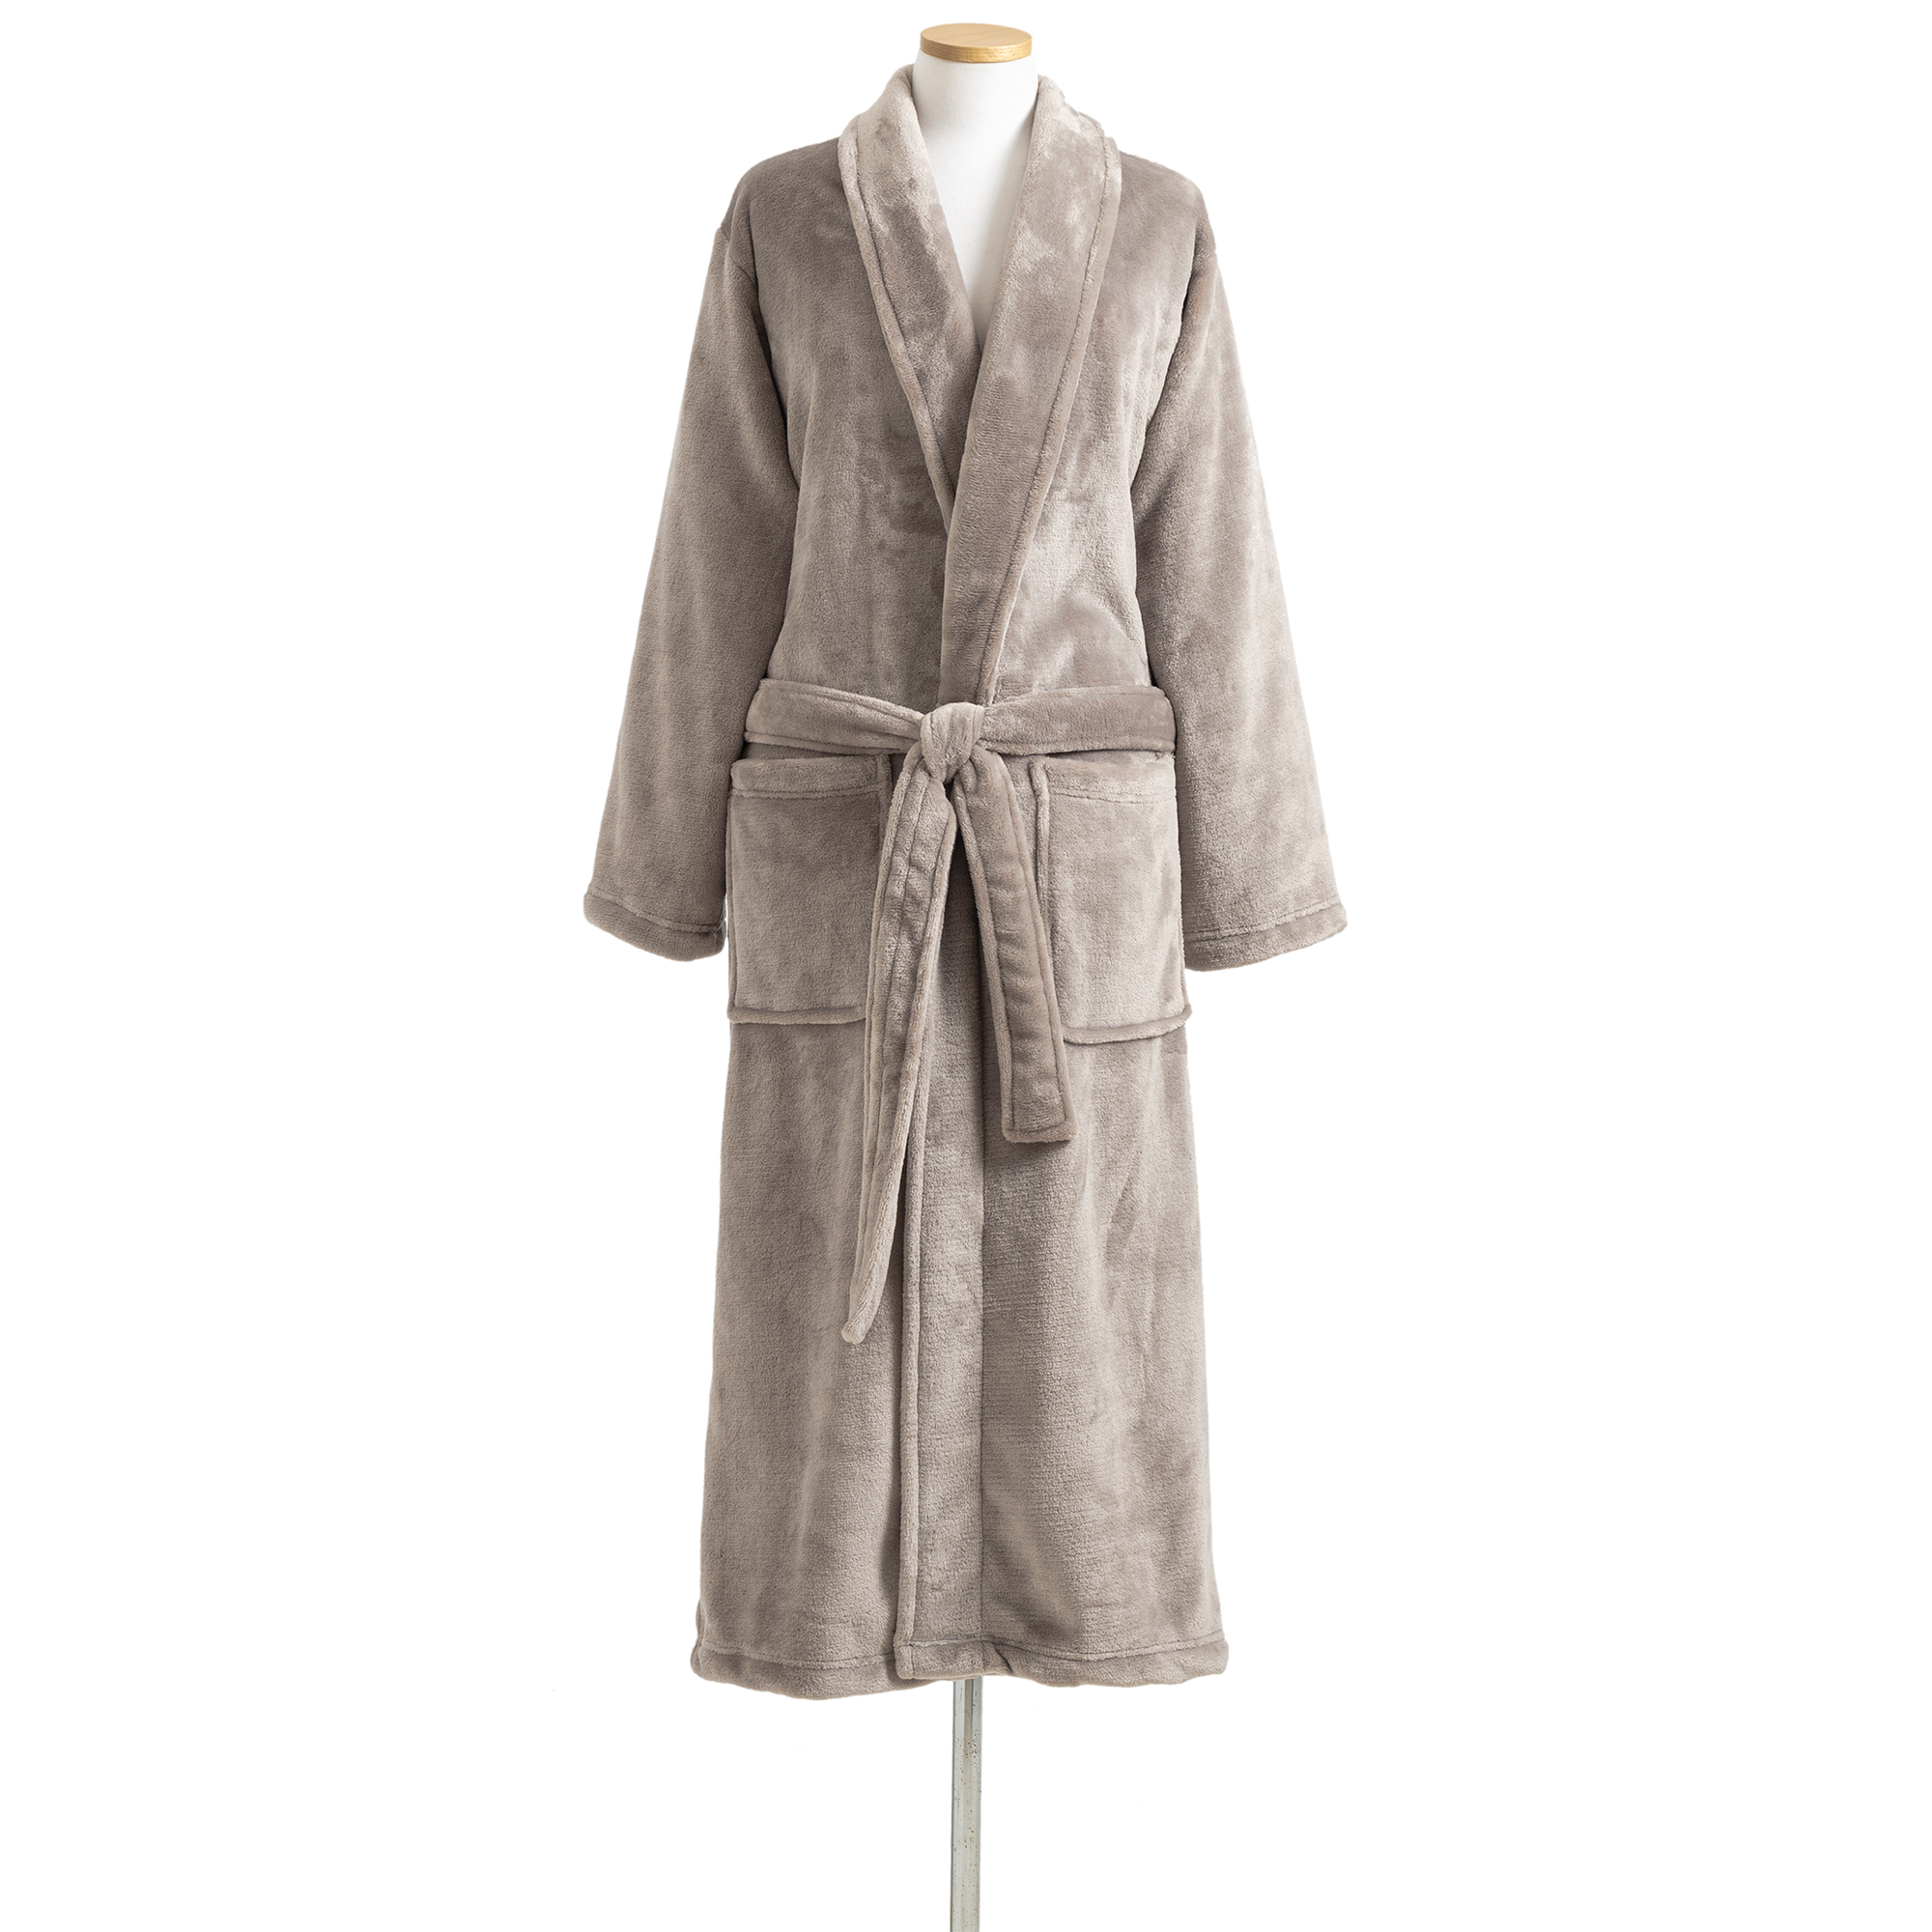 Whole Image of Pine Cone Hill Sheepy Fleece 2.0 Robe in Pebble Color